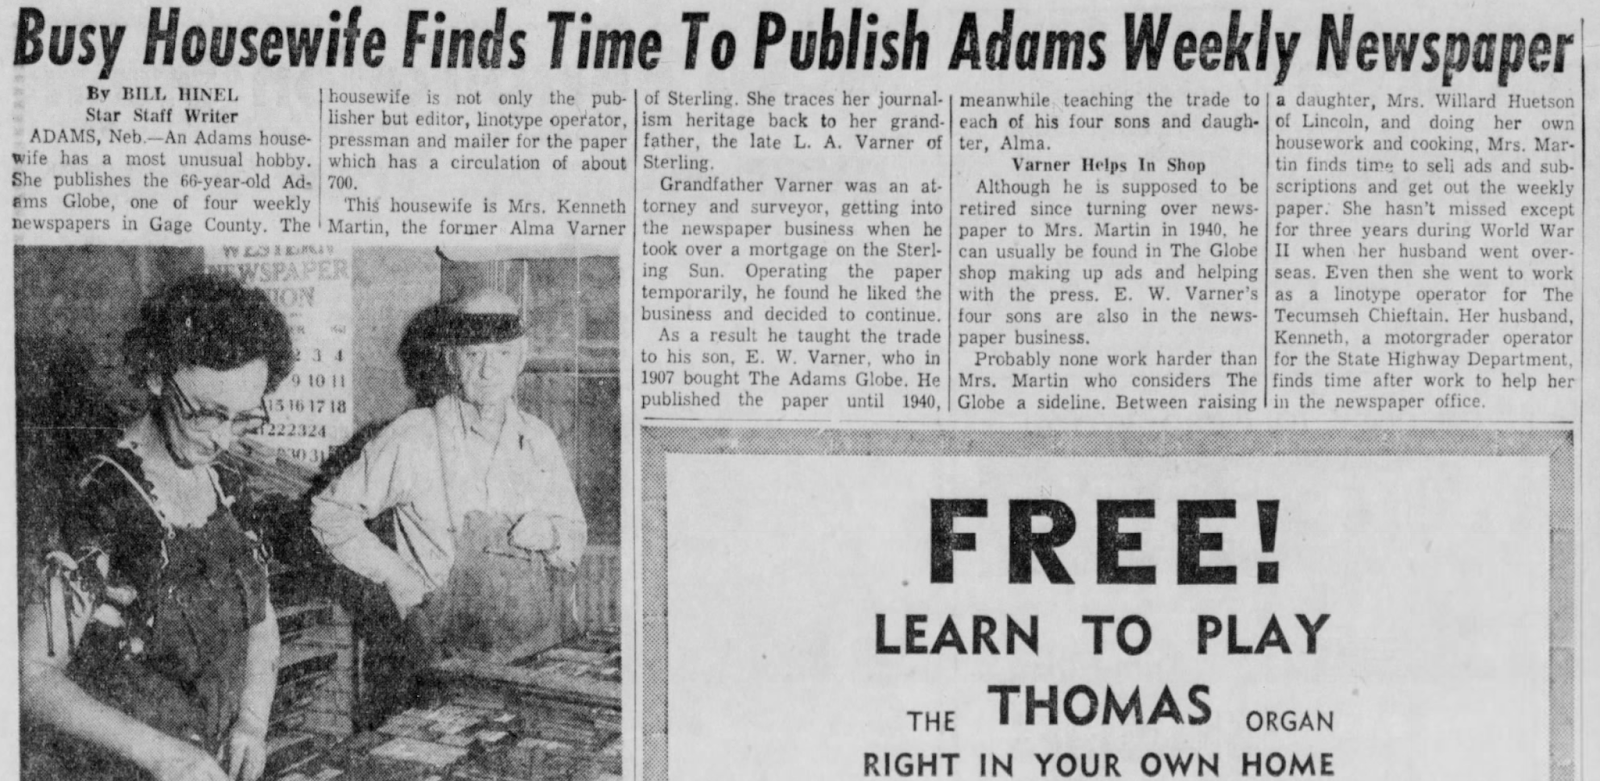 "Busy Housewife Finds Time To Publish Adams Weekly Newspaper"